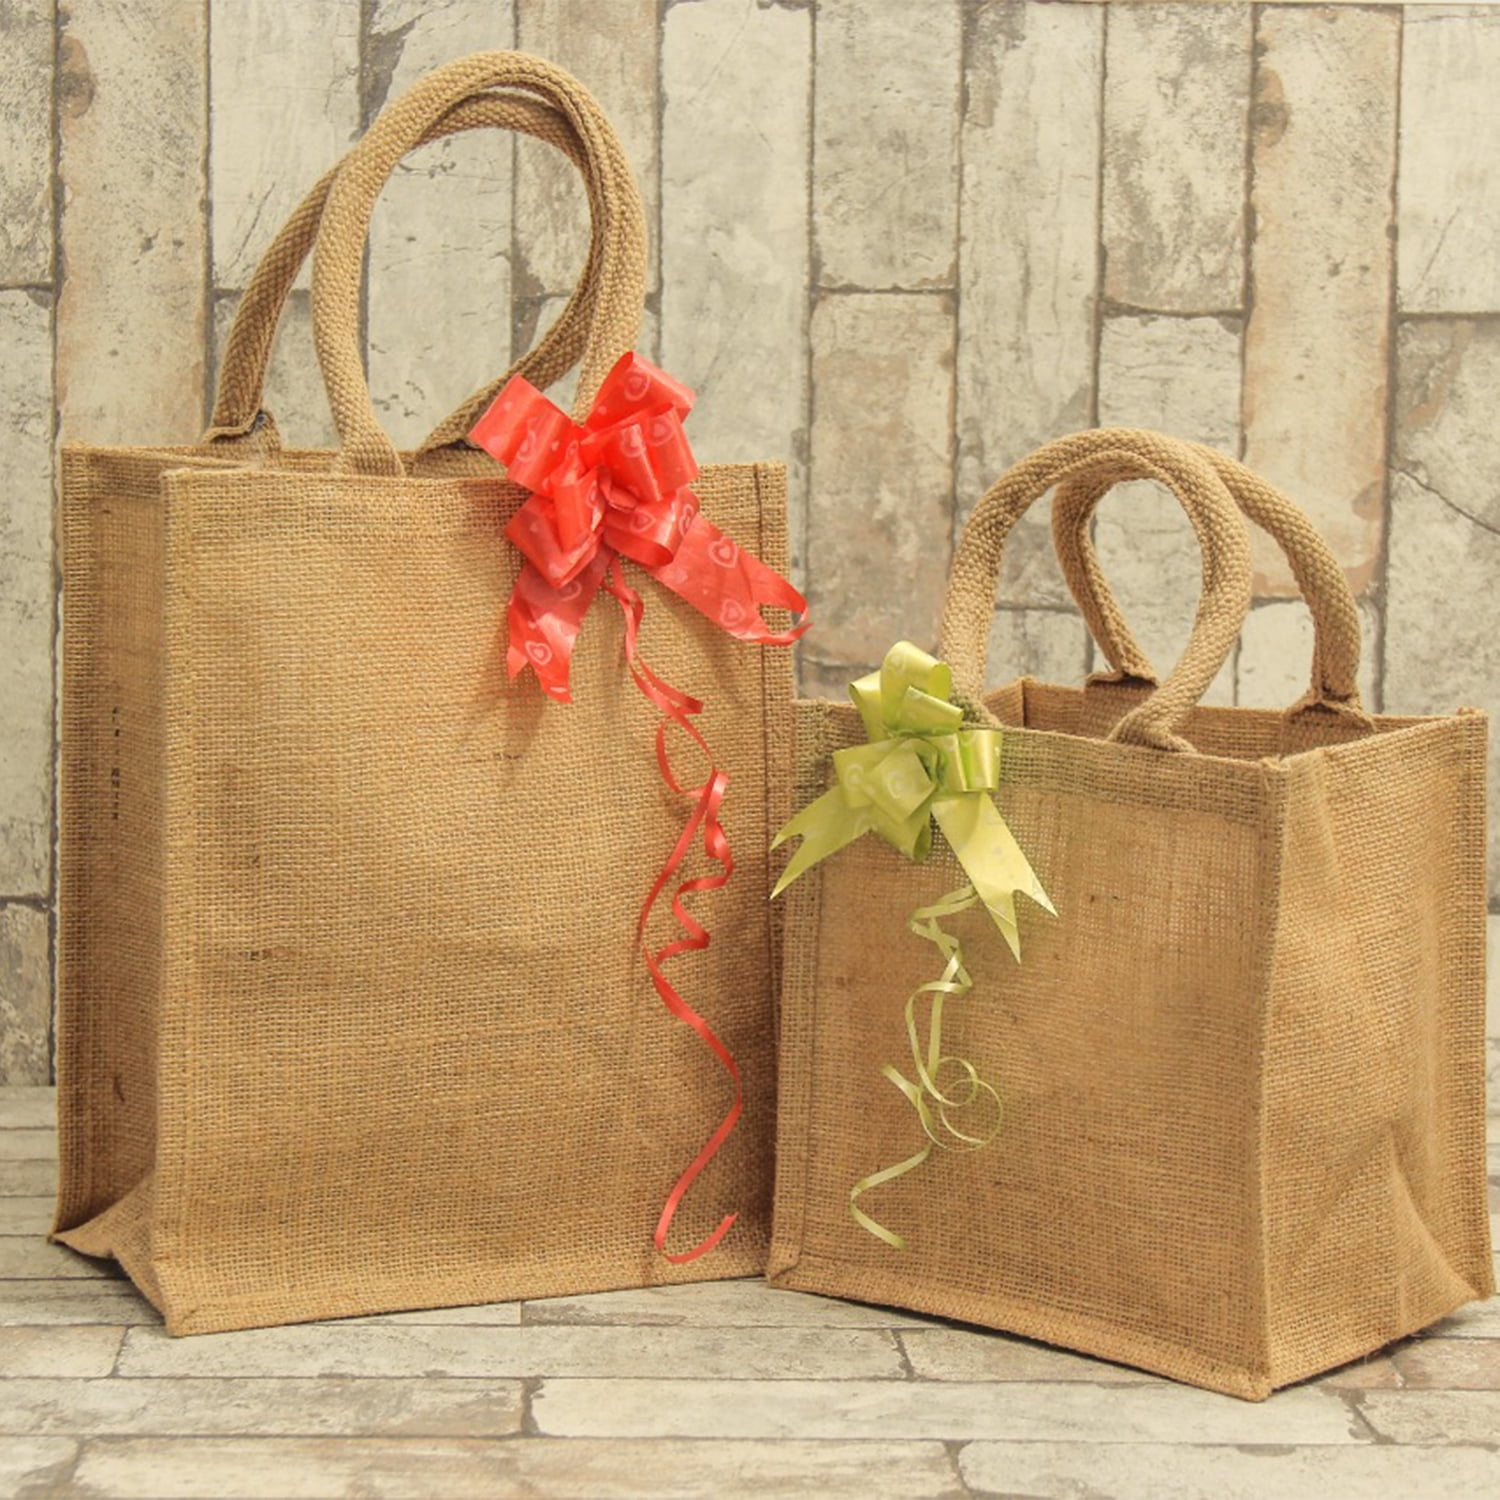 Burlap Gift Bags Wedding Hessian Jute Bags Linen Jewelry Pouches Party  Favors | eBay